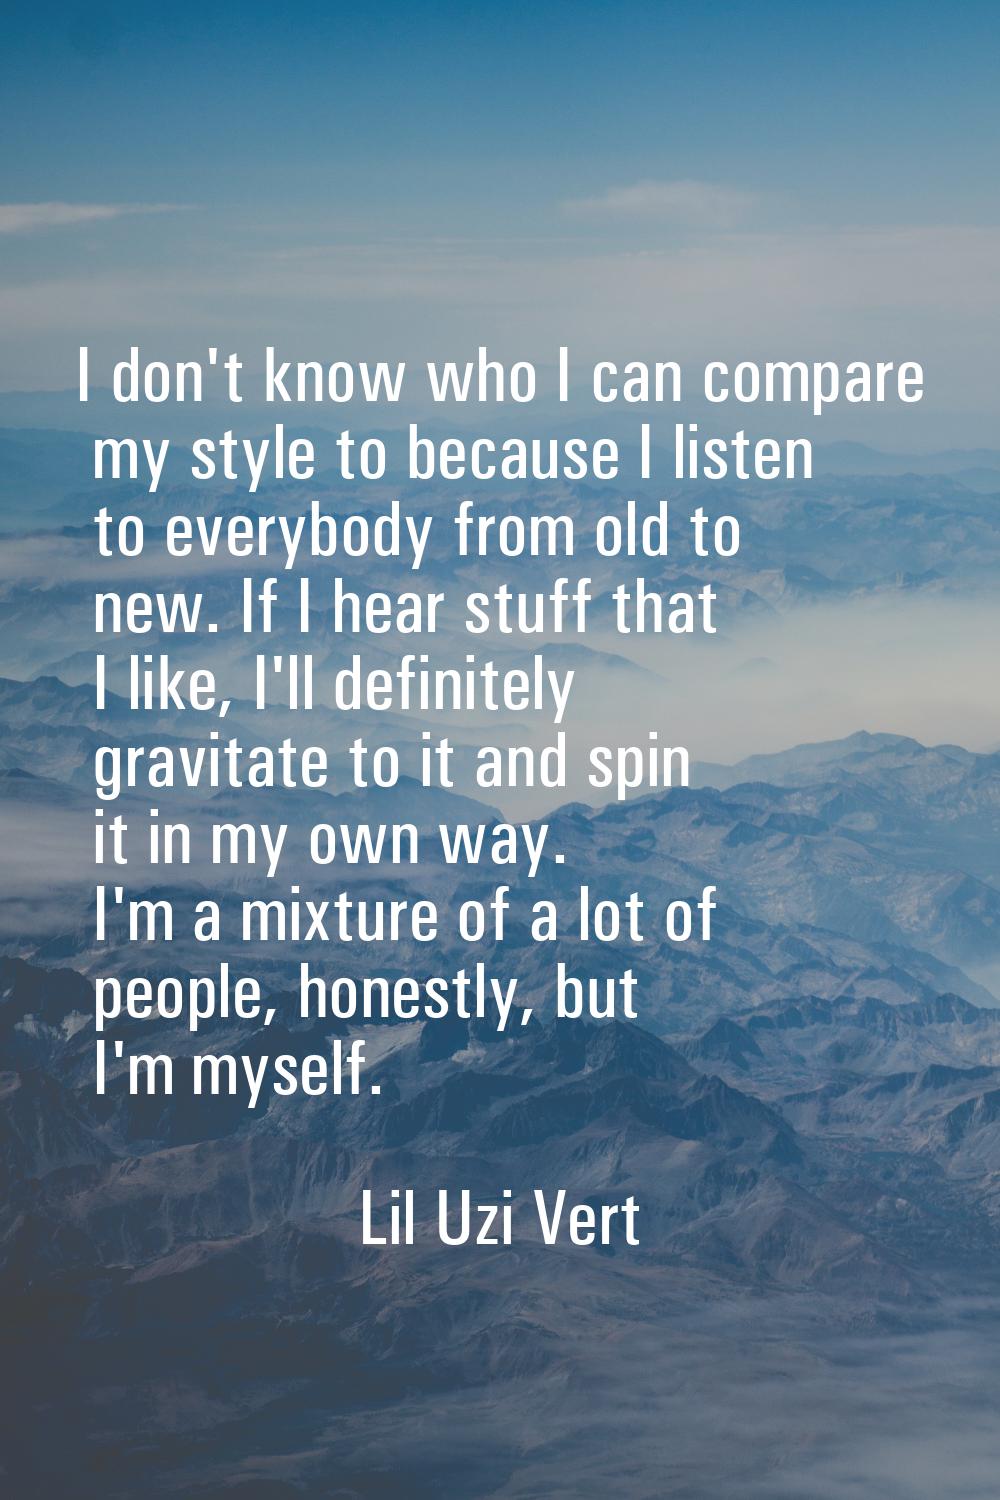 I don't know who I can compare my style to because I listen to everybody from old to new. If I hear